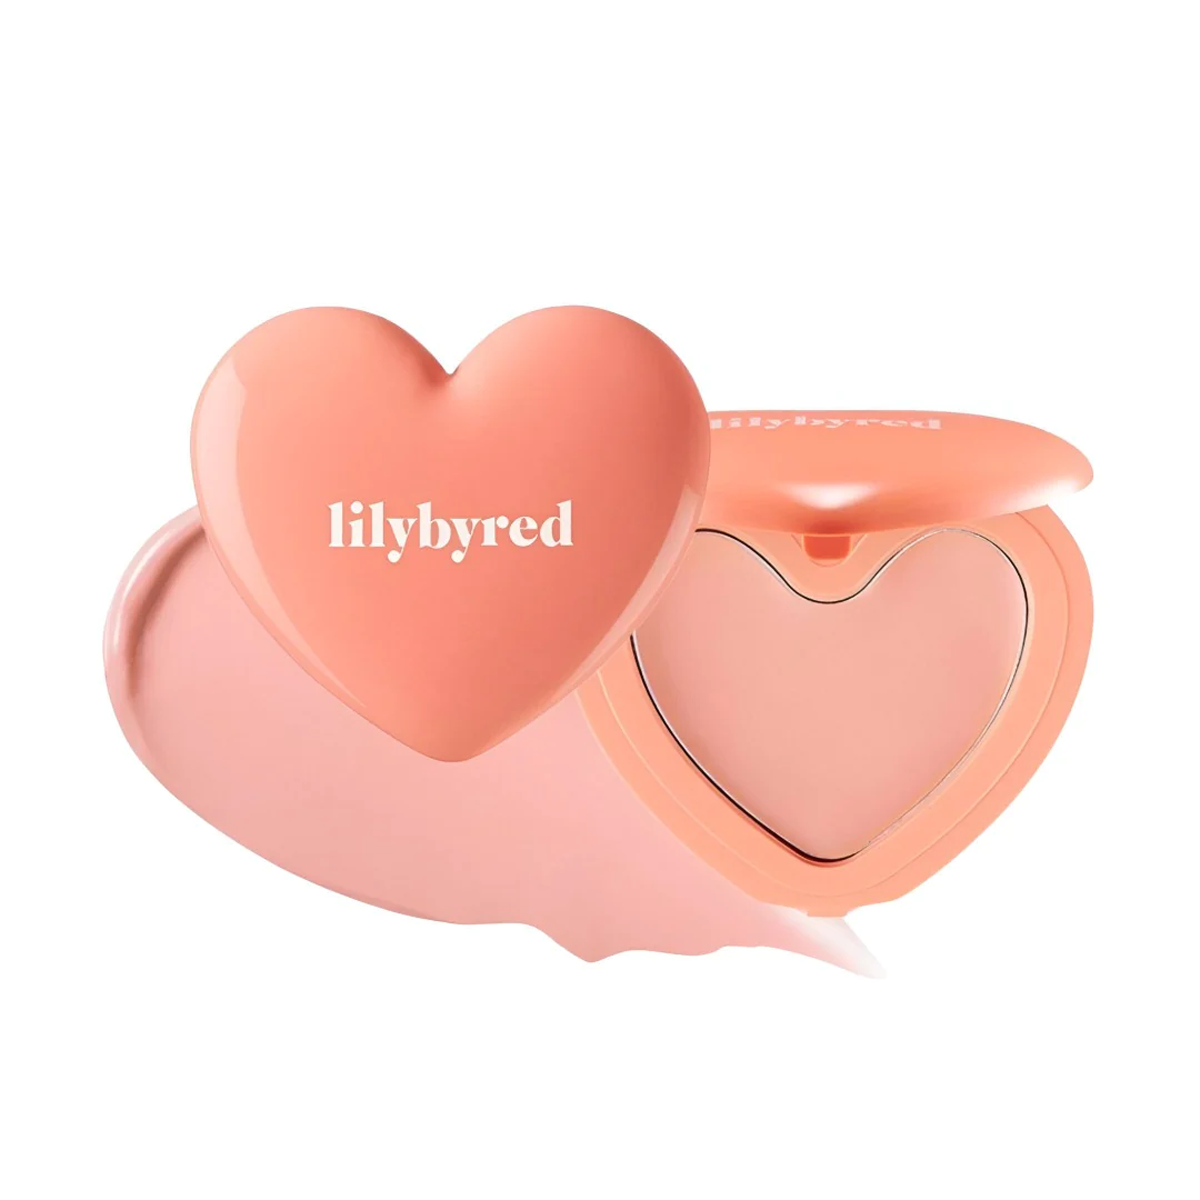 Lilybyred Luv Beam Cheek Balm for Glowing Skin - Korean Cosmetic, Hydrating & Pigmented Cheek Color, Easy Blend Formula for Luminous Finish - Blush Makeup